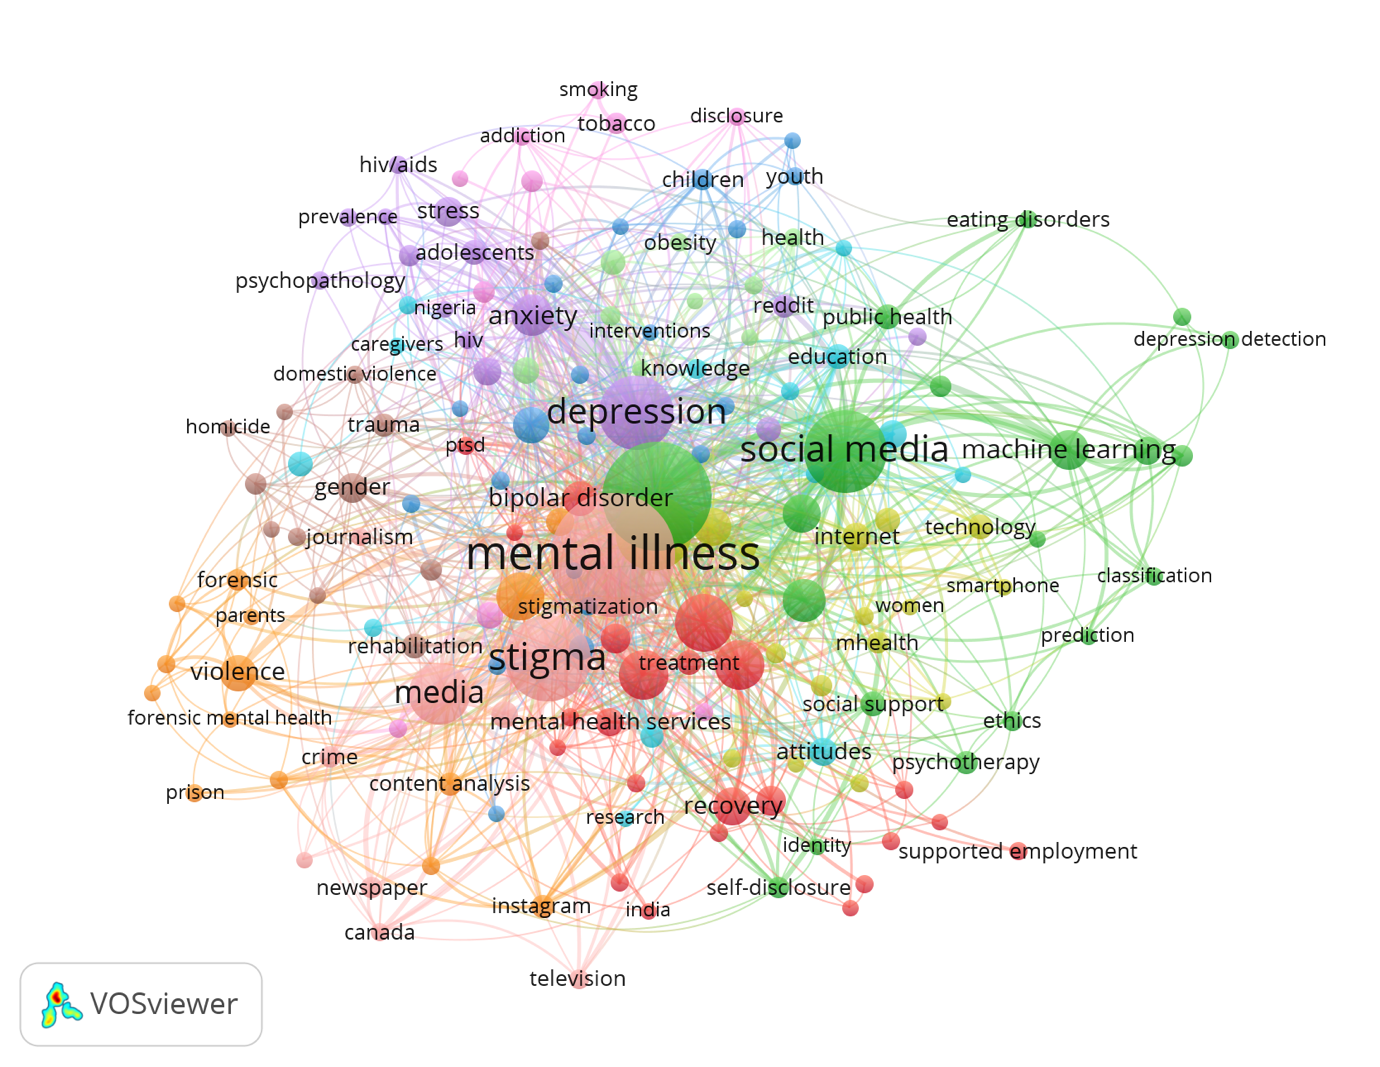 Network visualization map of author keywords with at least five occurrences.